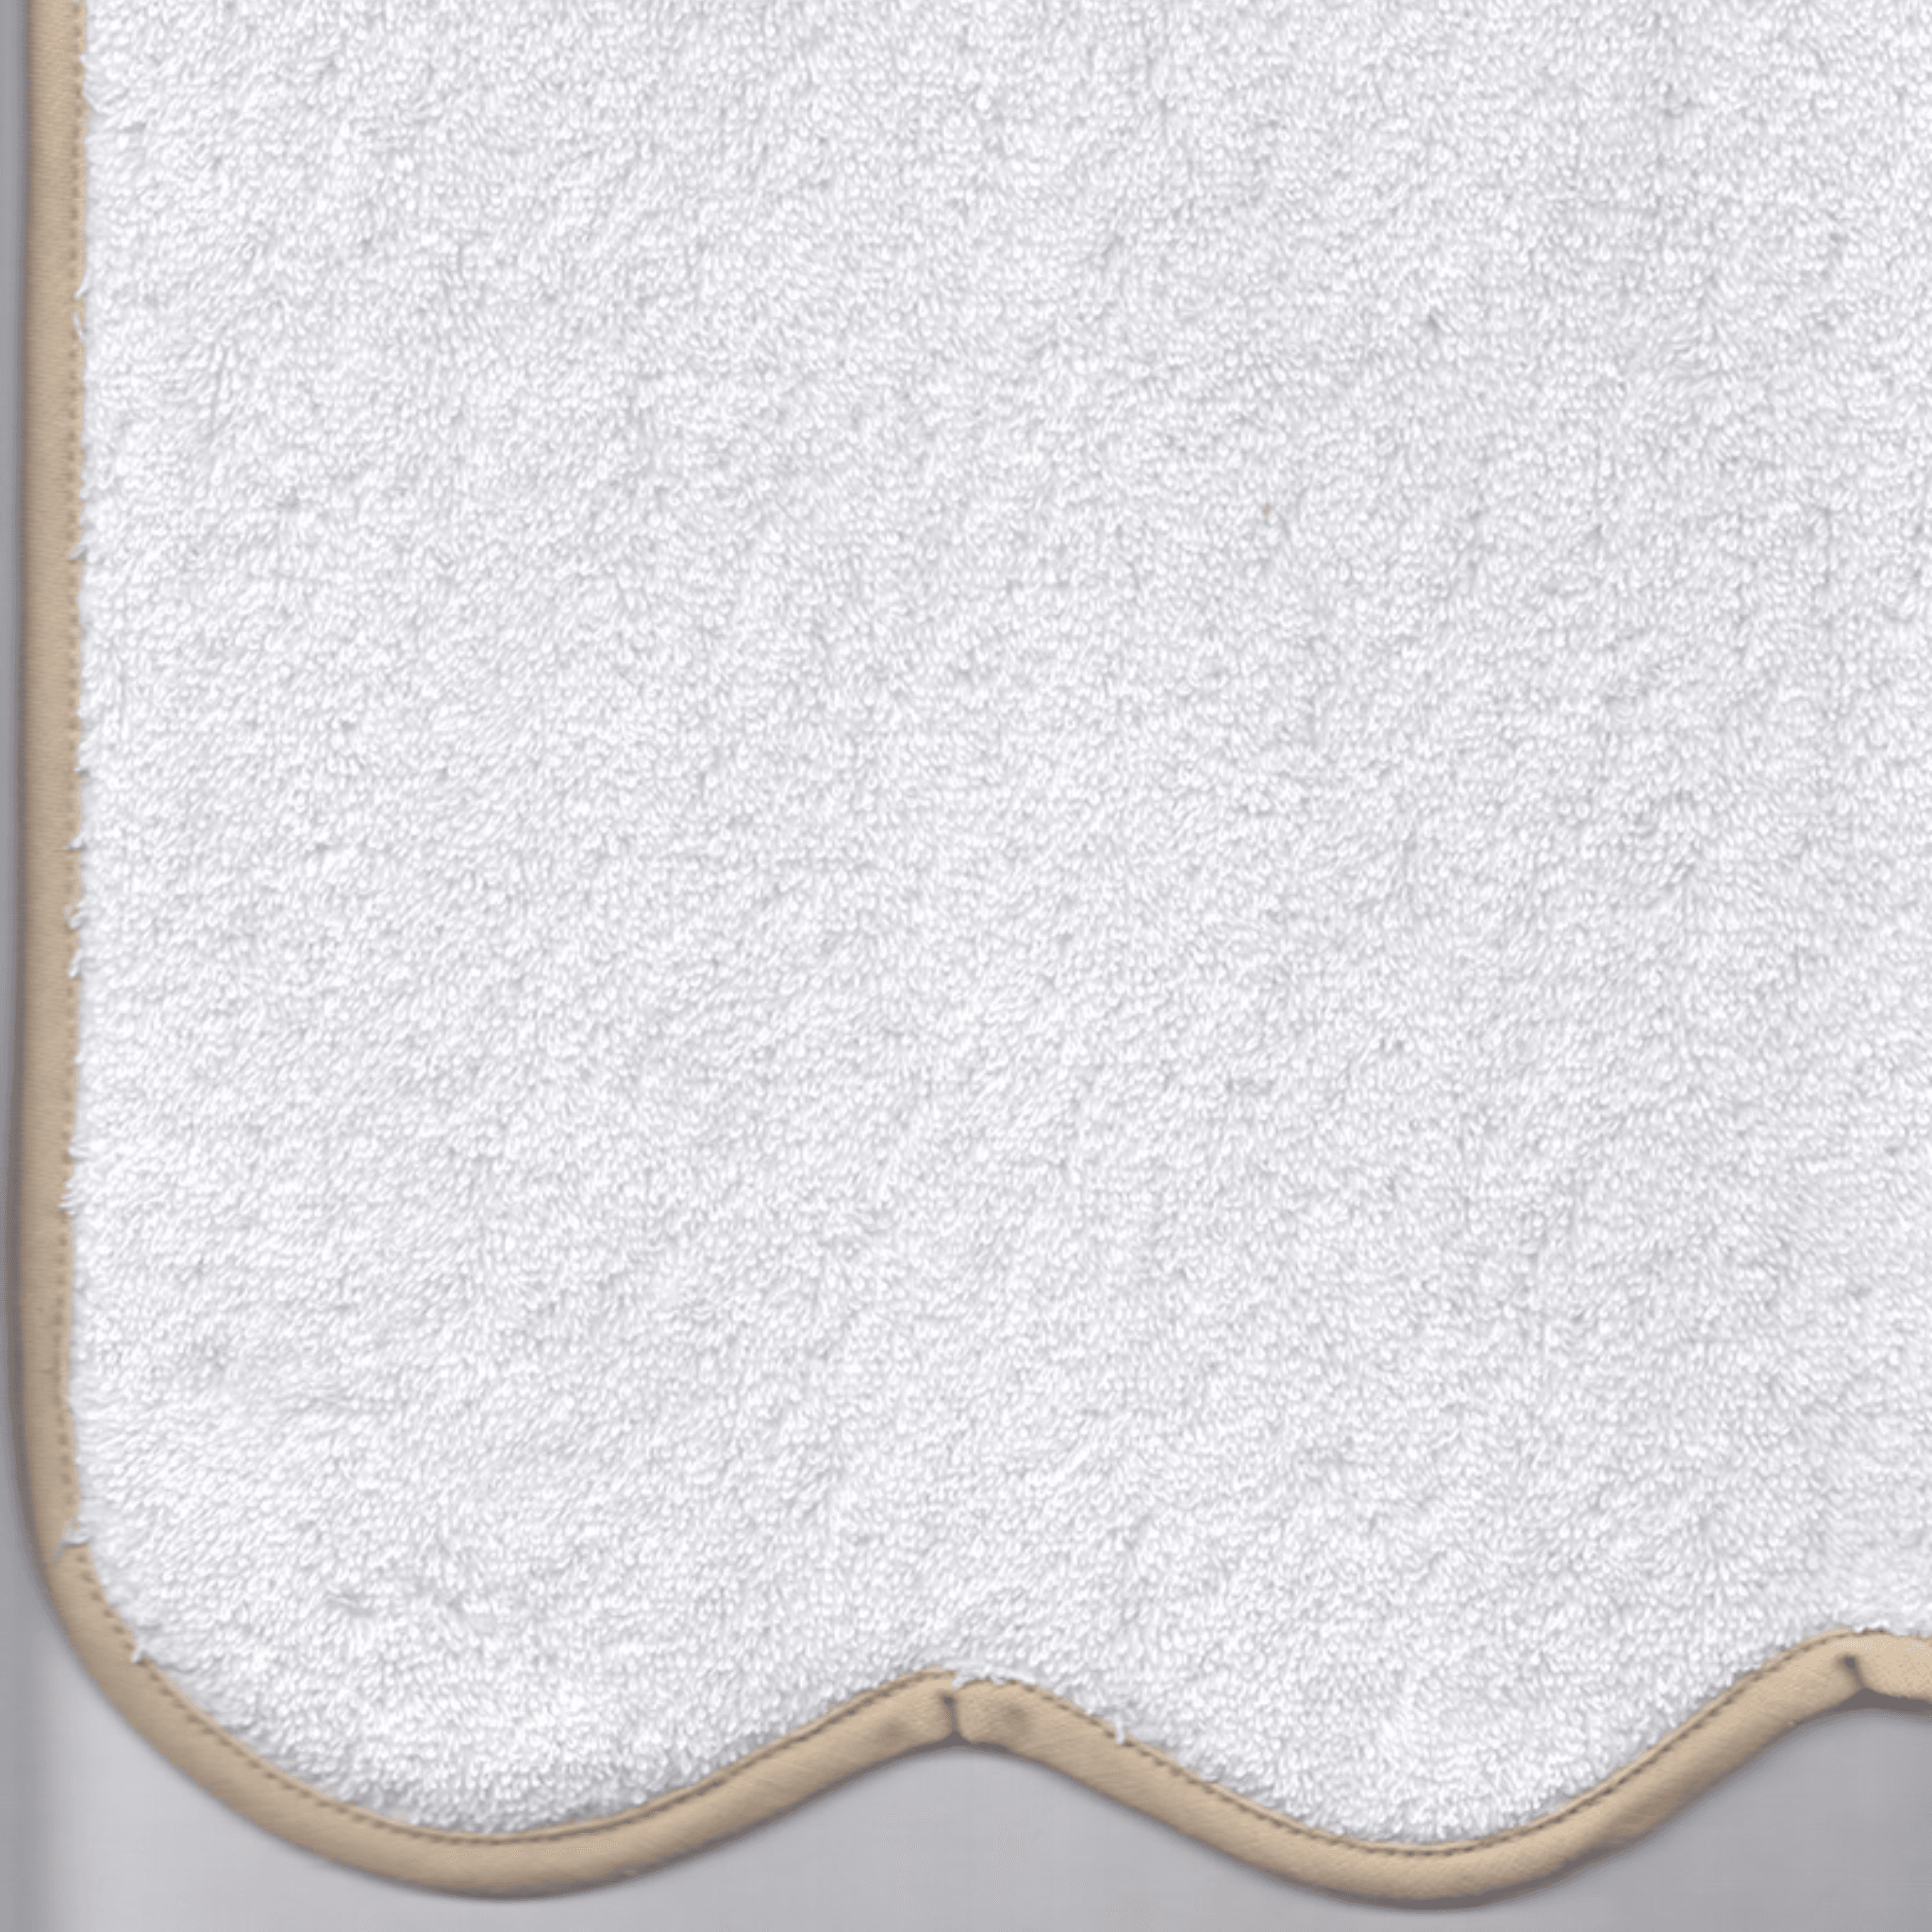 https://www.wellappointedhouse.com/cdn/shop/files/plush-devon-terry-scalloped-bath-towels-with-optional-monogram-available-in-a-variety-of-trim-colors-bath-towels-the-well-appointed-house-5_d7192f4e-c8e9-4781-bc4b-f460a4d1bb74.png?v=1691670513